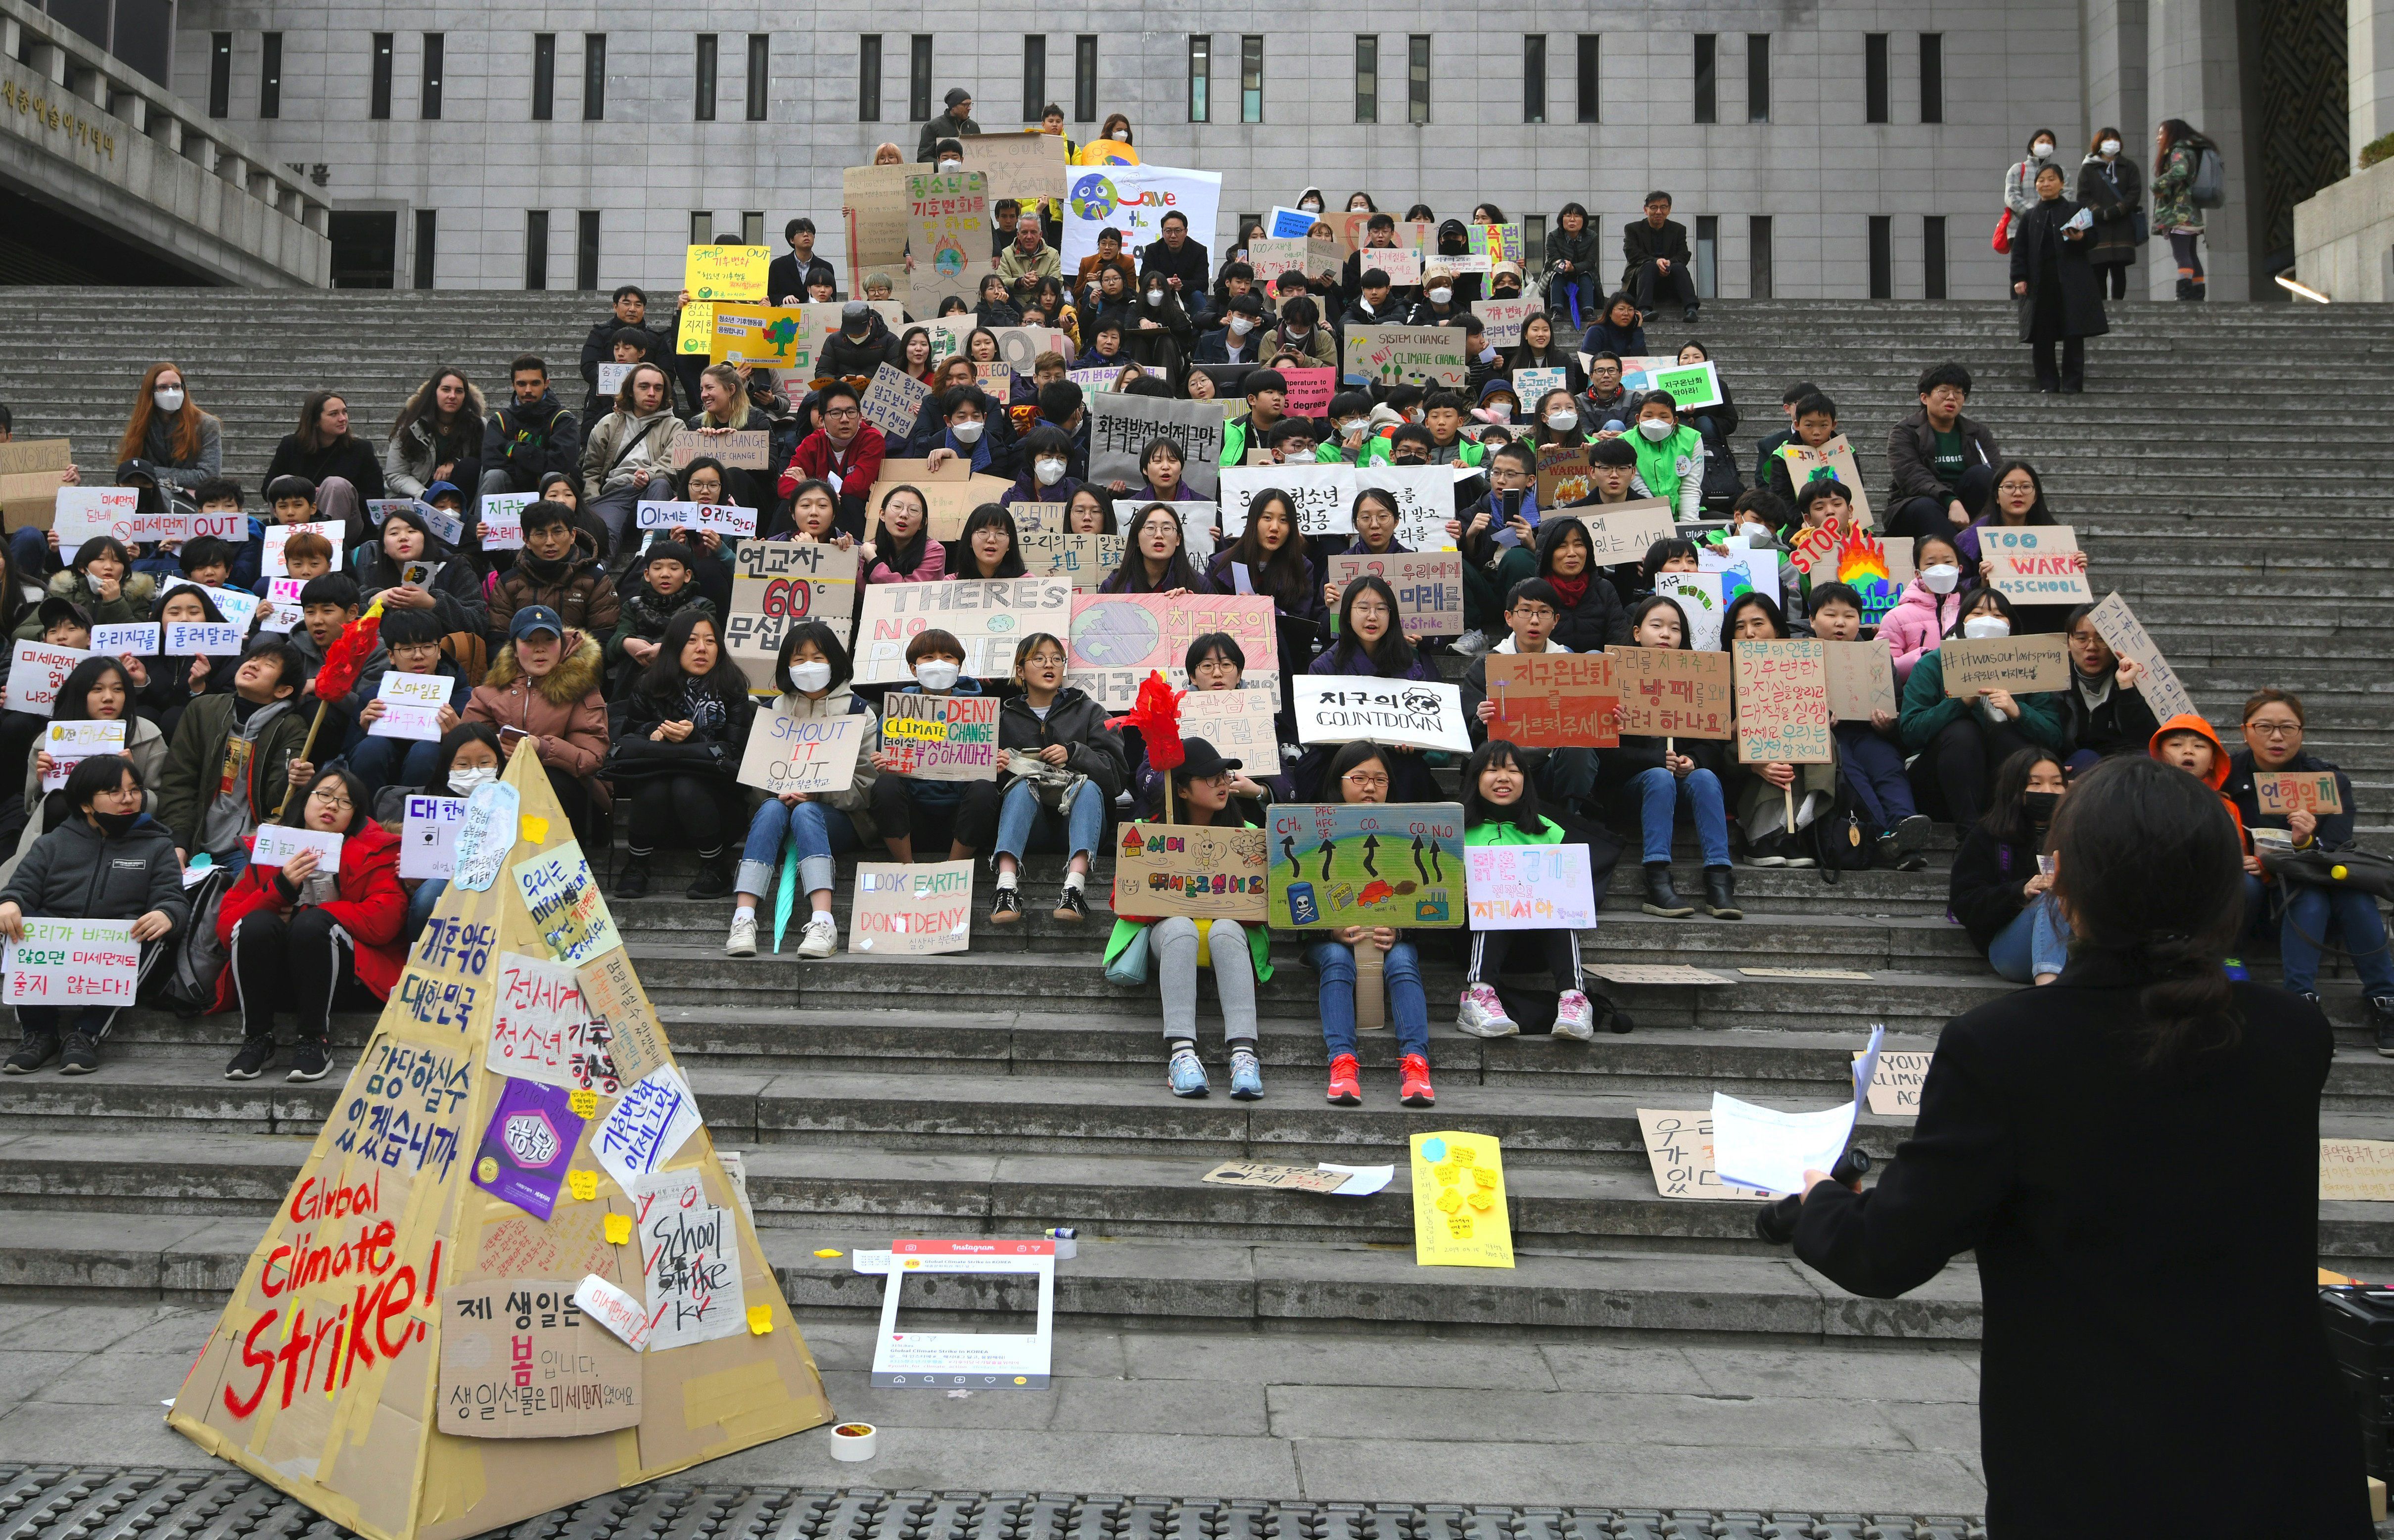 South Korean protestors sit on steps with their signs, next to a teepee made out of more signs.